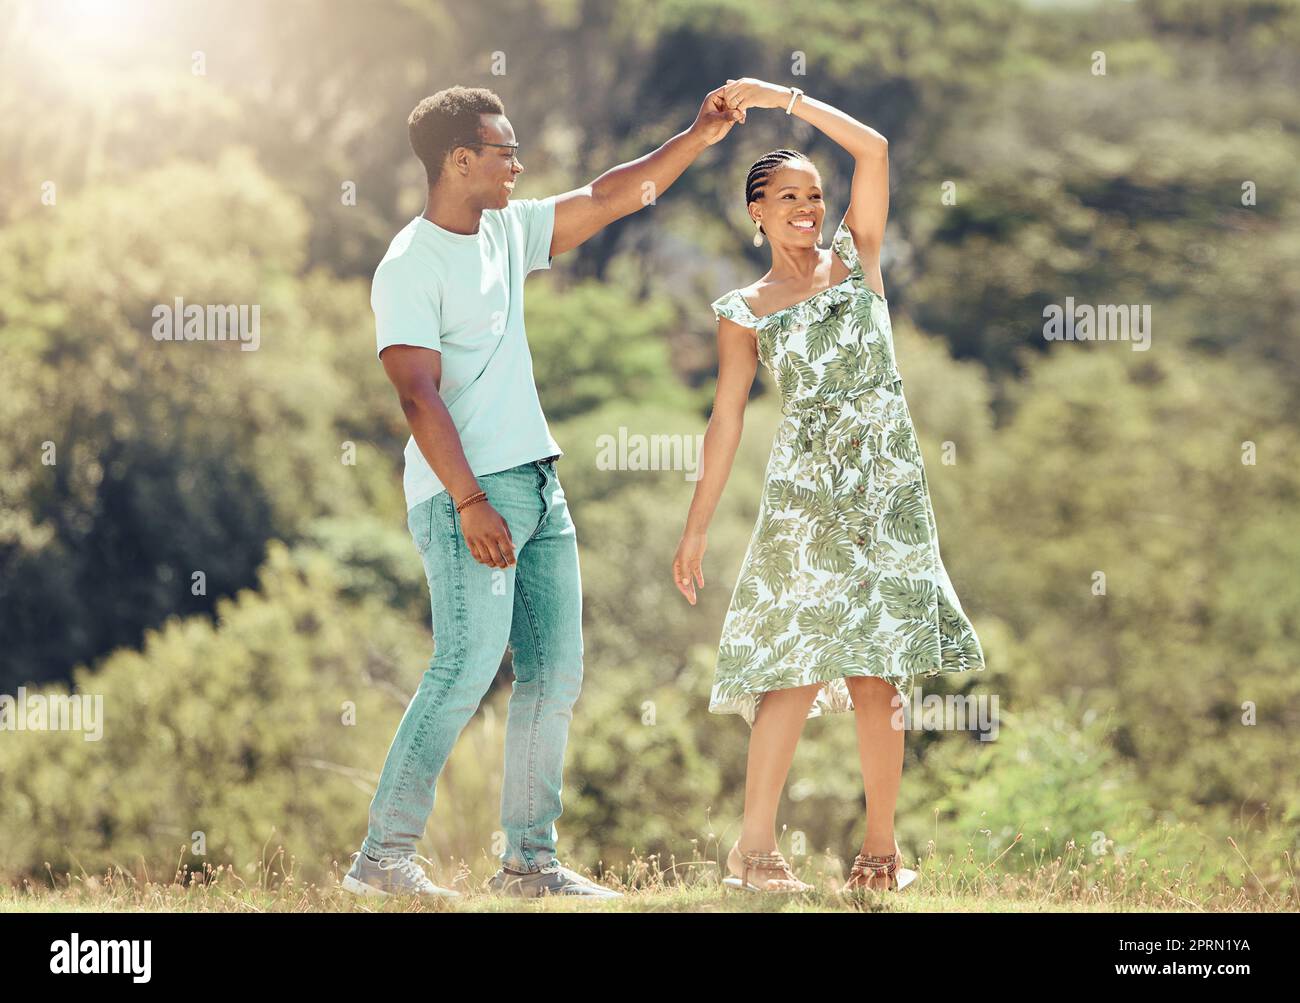 Love, freedom and celebration by couple dancing outdoors, loving romantic getaway and bonding. Happy black man and woman being playful and sweet, enjoying their relationship and having fun together Stock Photo